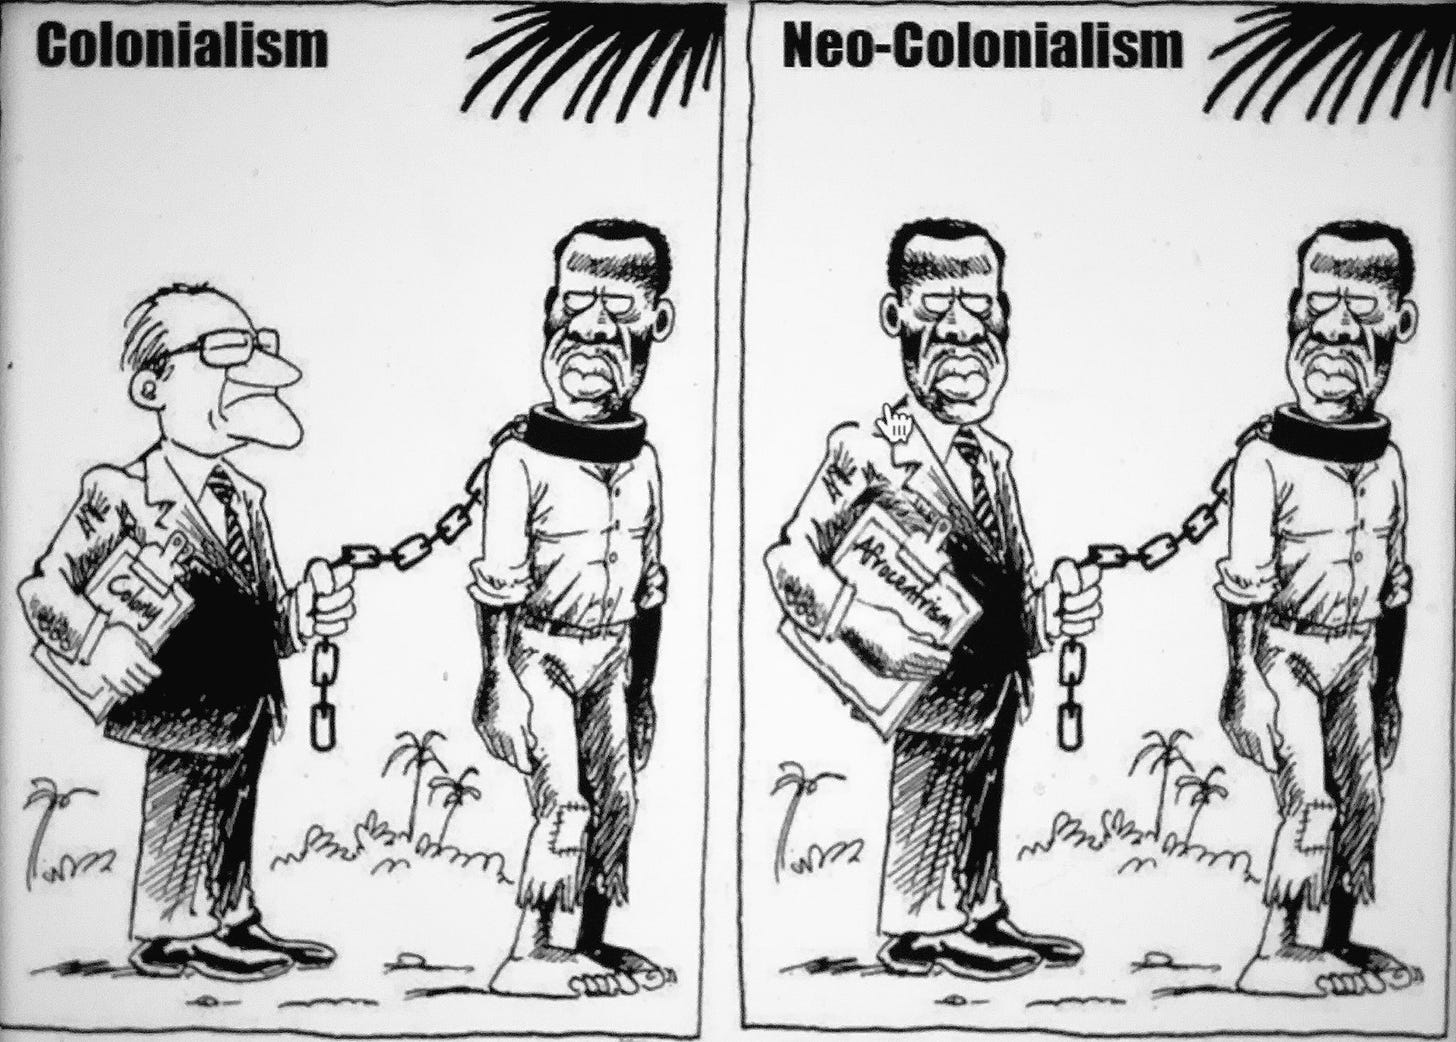 A cartoon showing colonialism by the white man and neo-colonialism by Africans on Africans